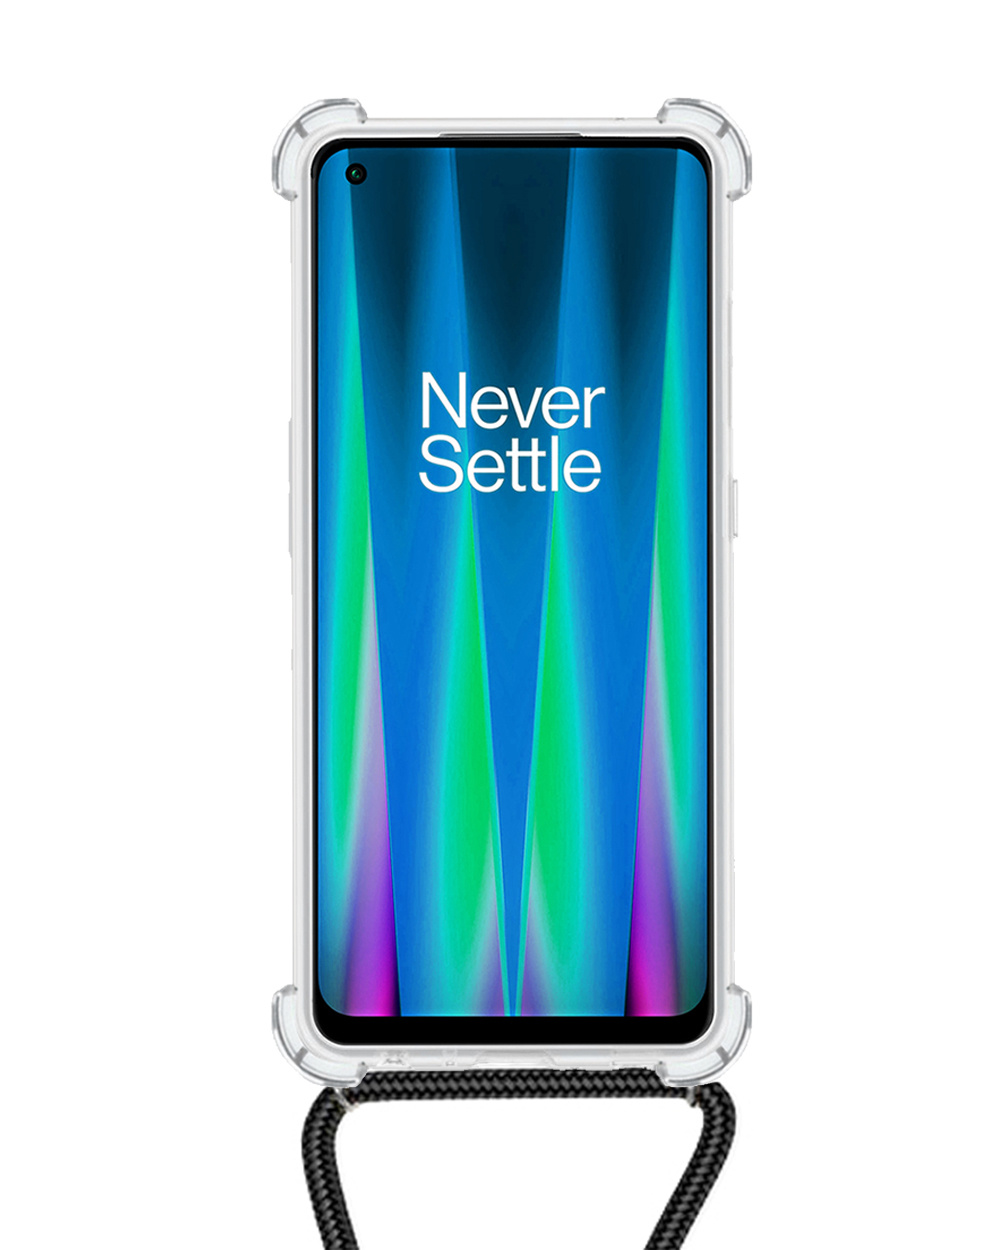 NoXx OnePlus Nord CE 2 5G Hoesje Transparant Met Telefoonkoord Cover Shock Proof Case Hoes